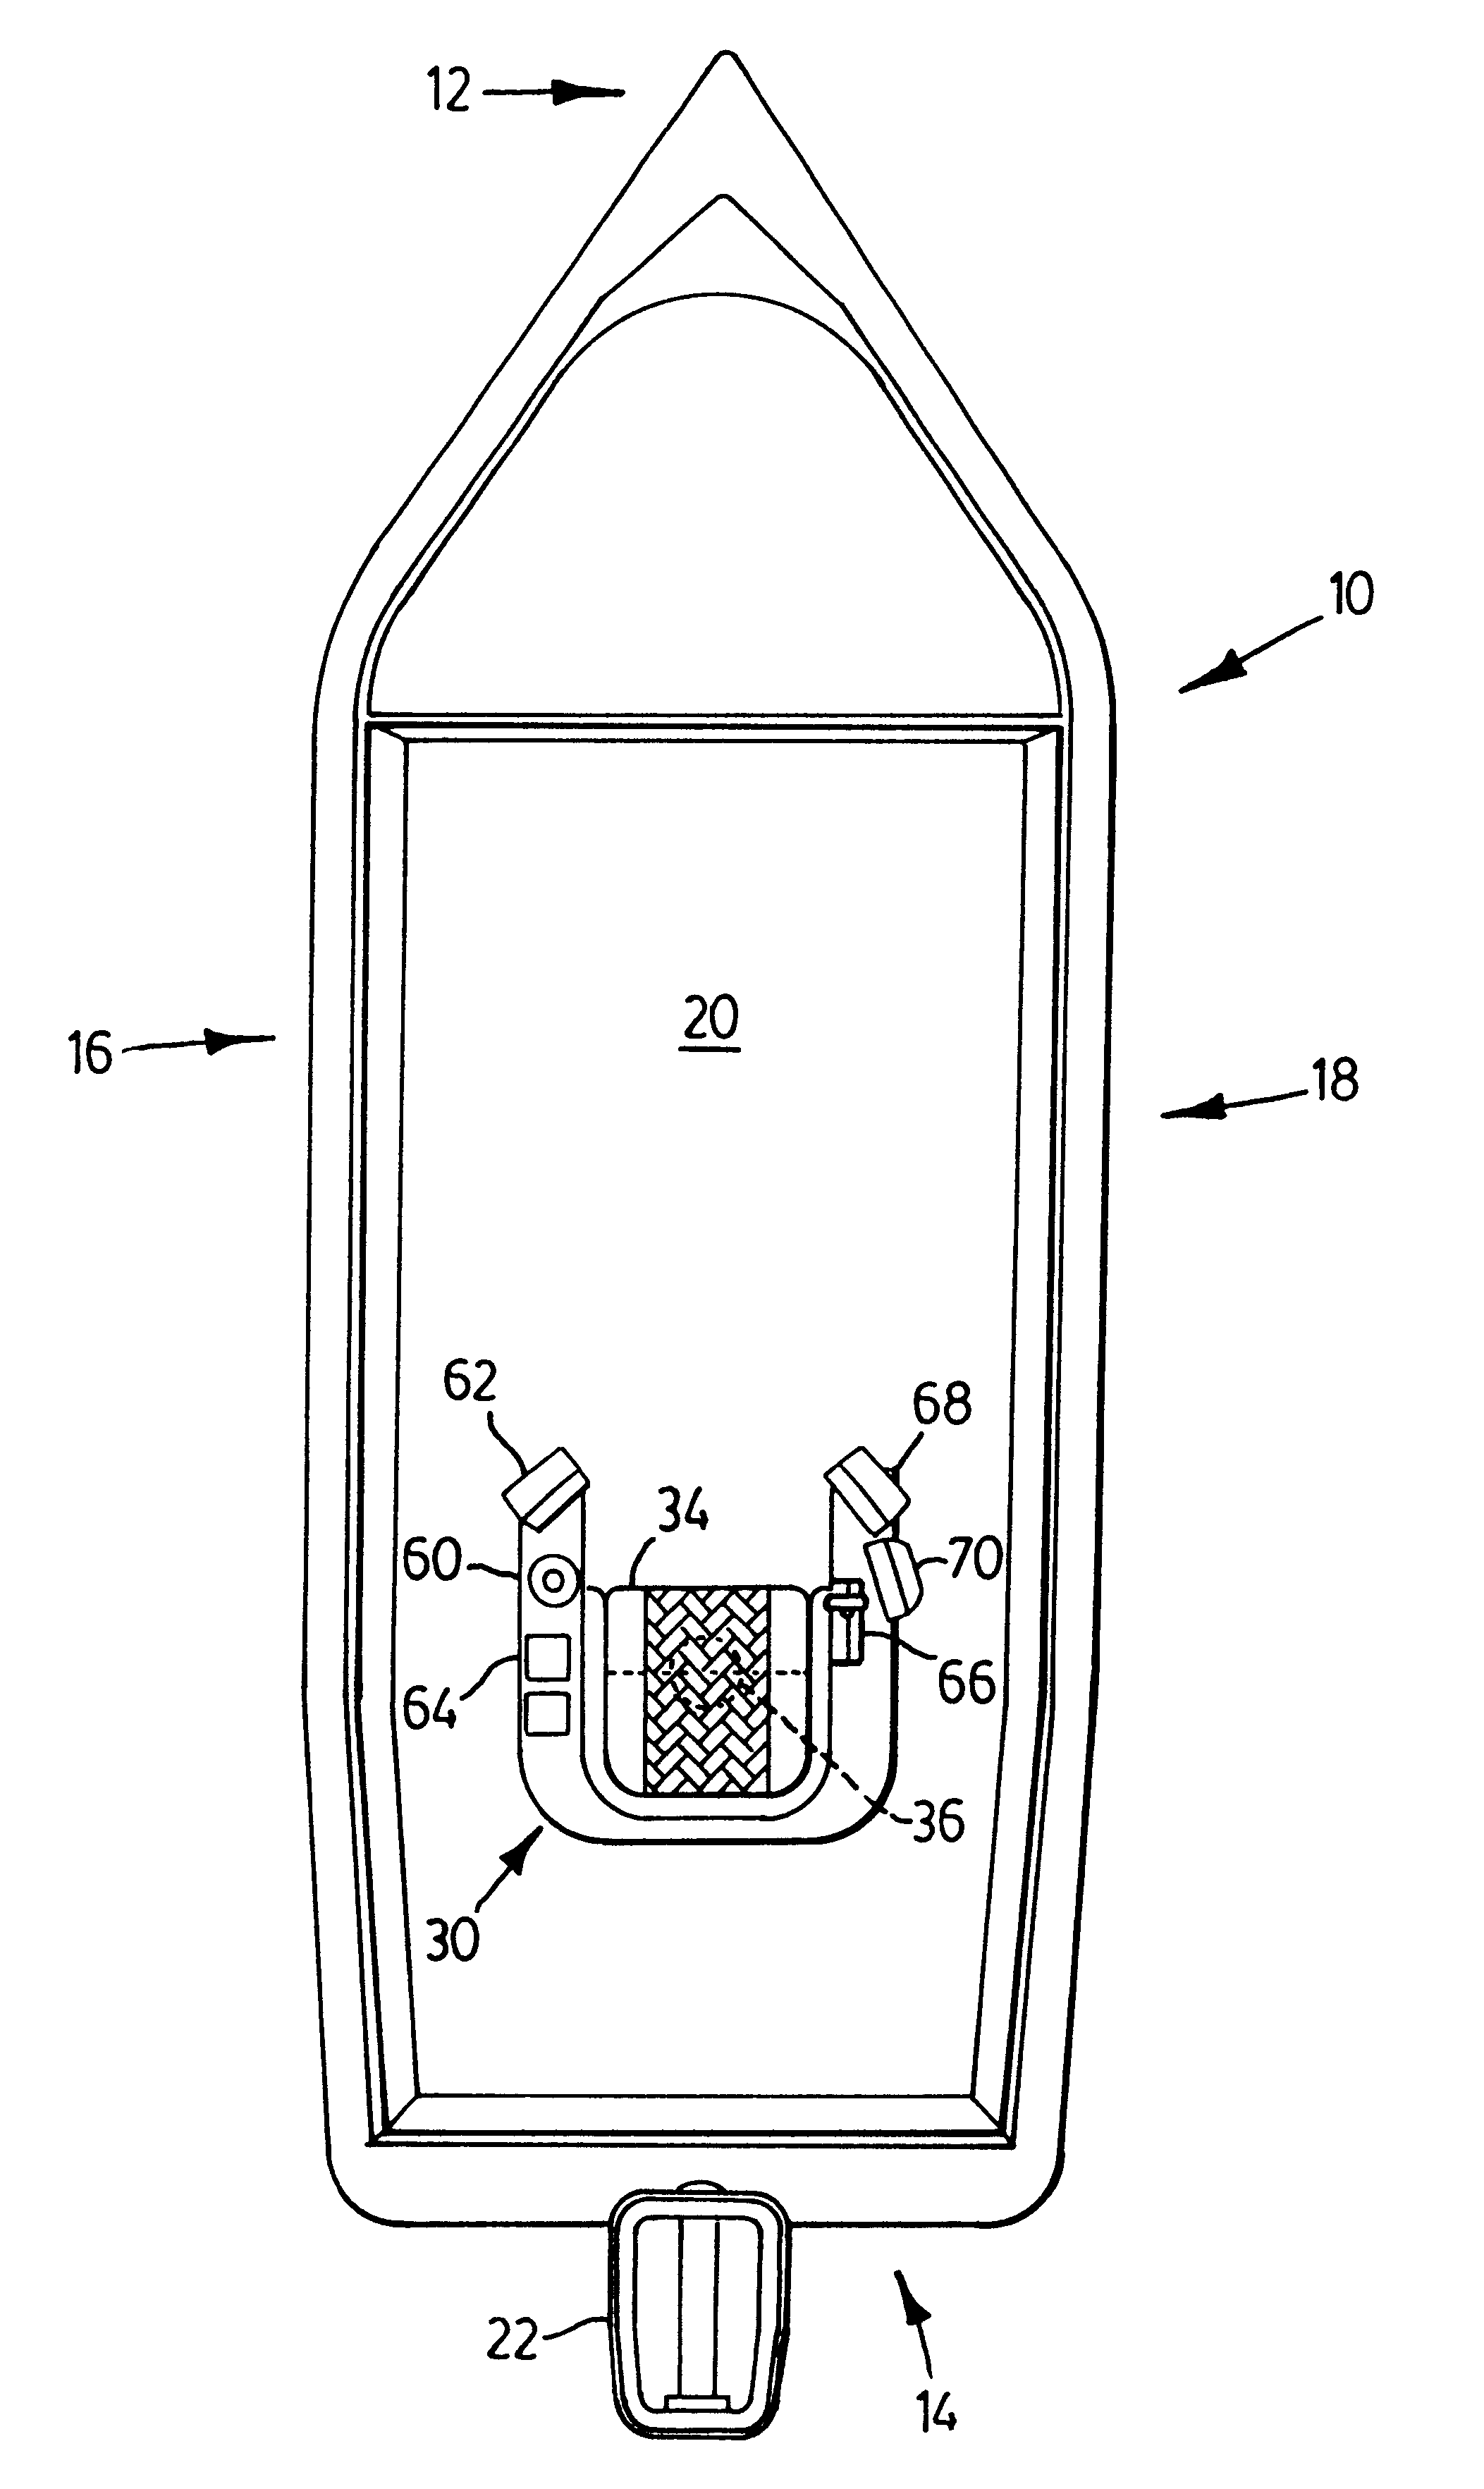 Control console and seating arrangement for motorized watercraft